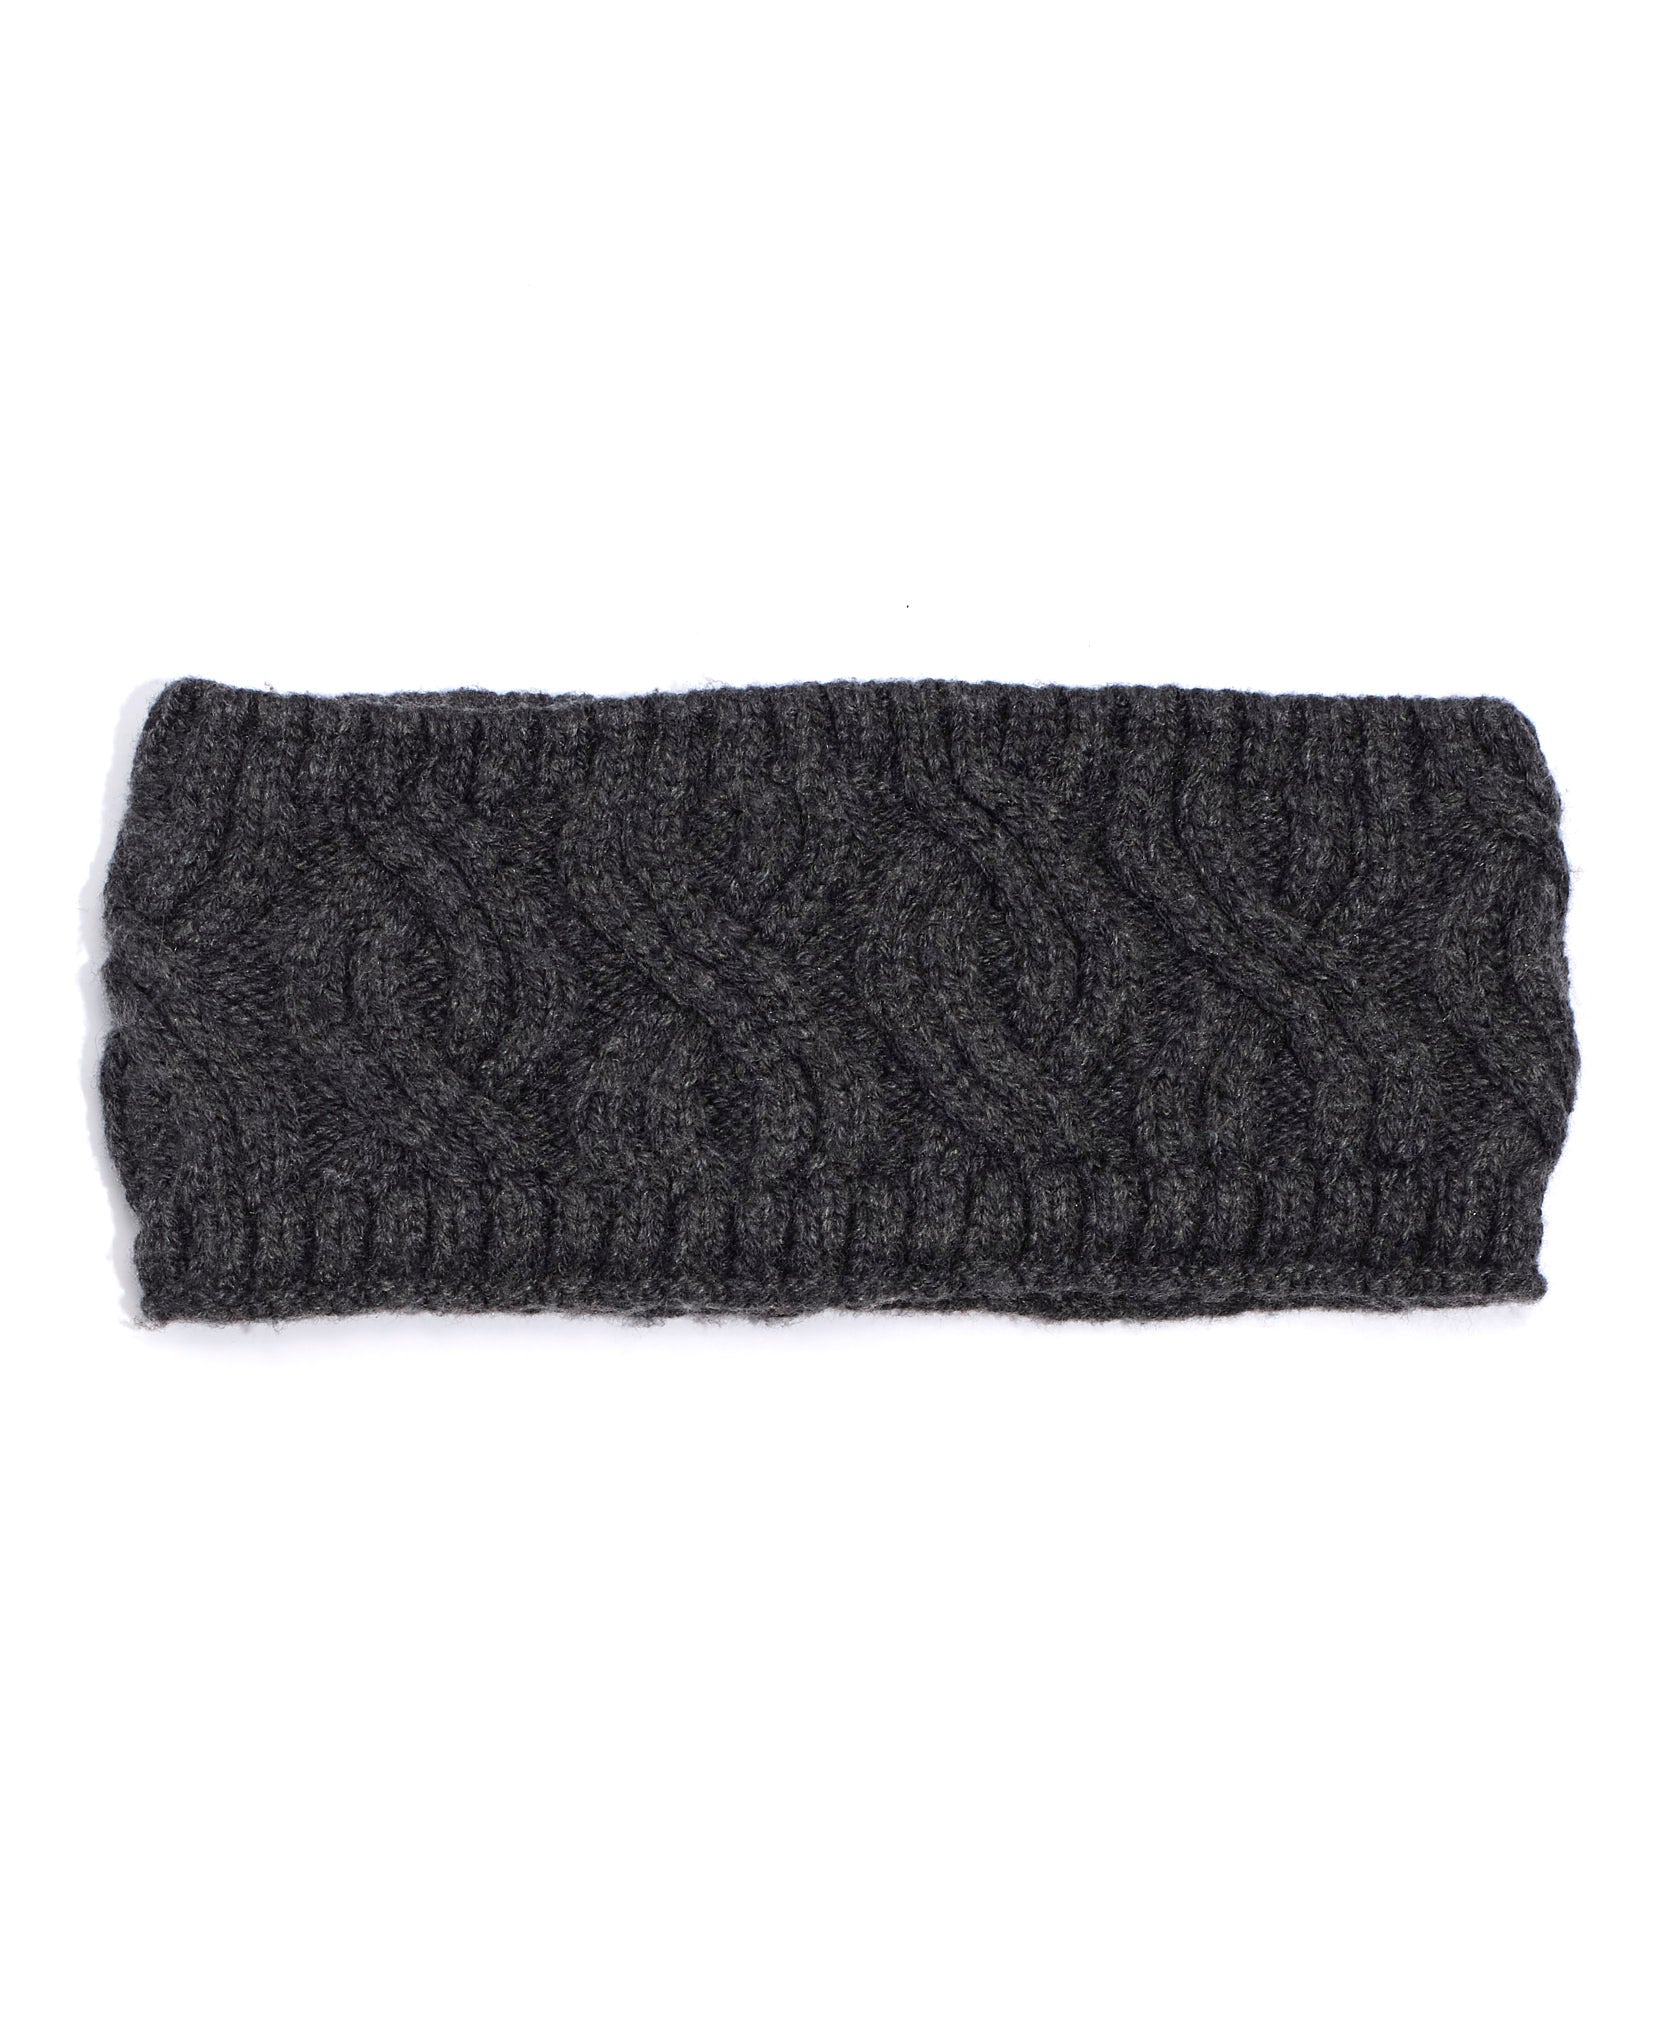 Recycled Headband in color Charcoal